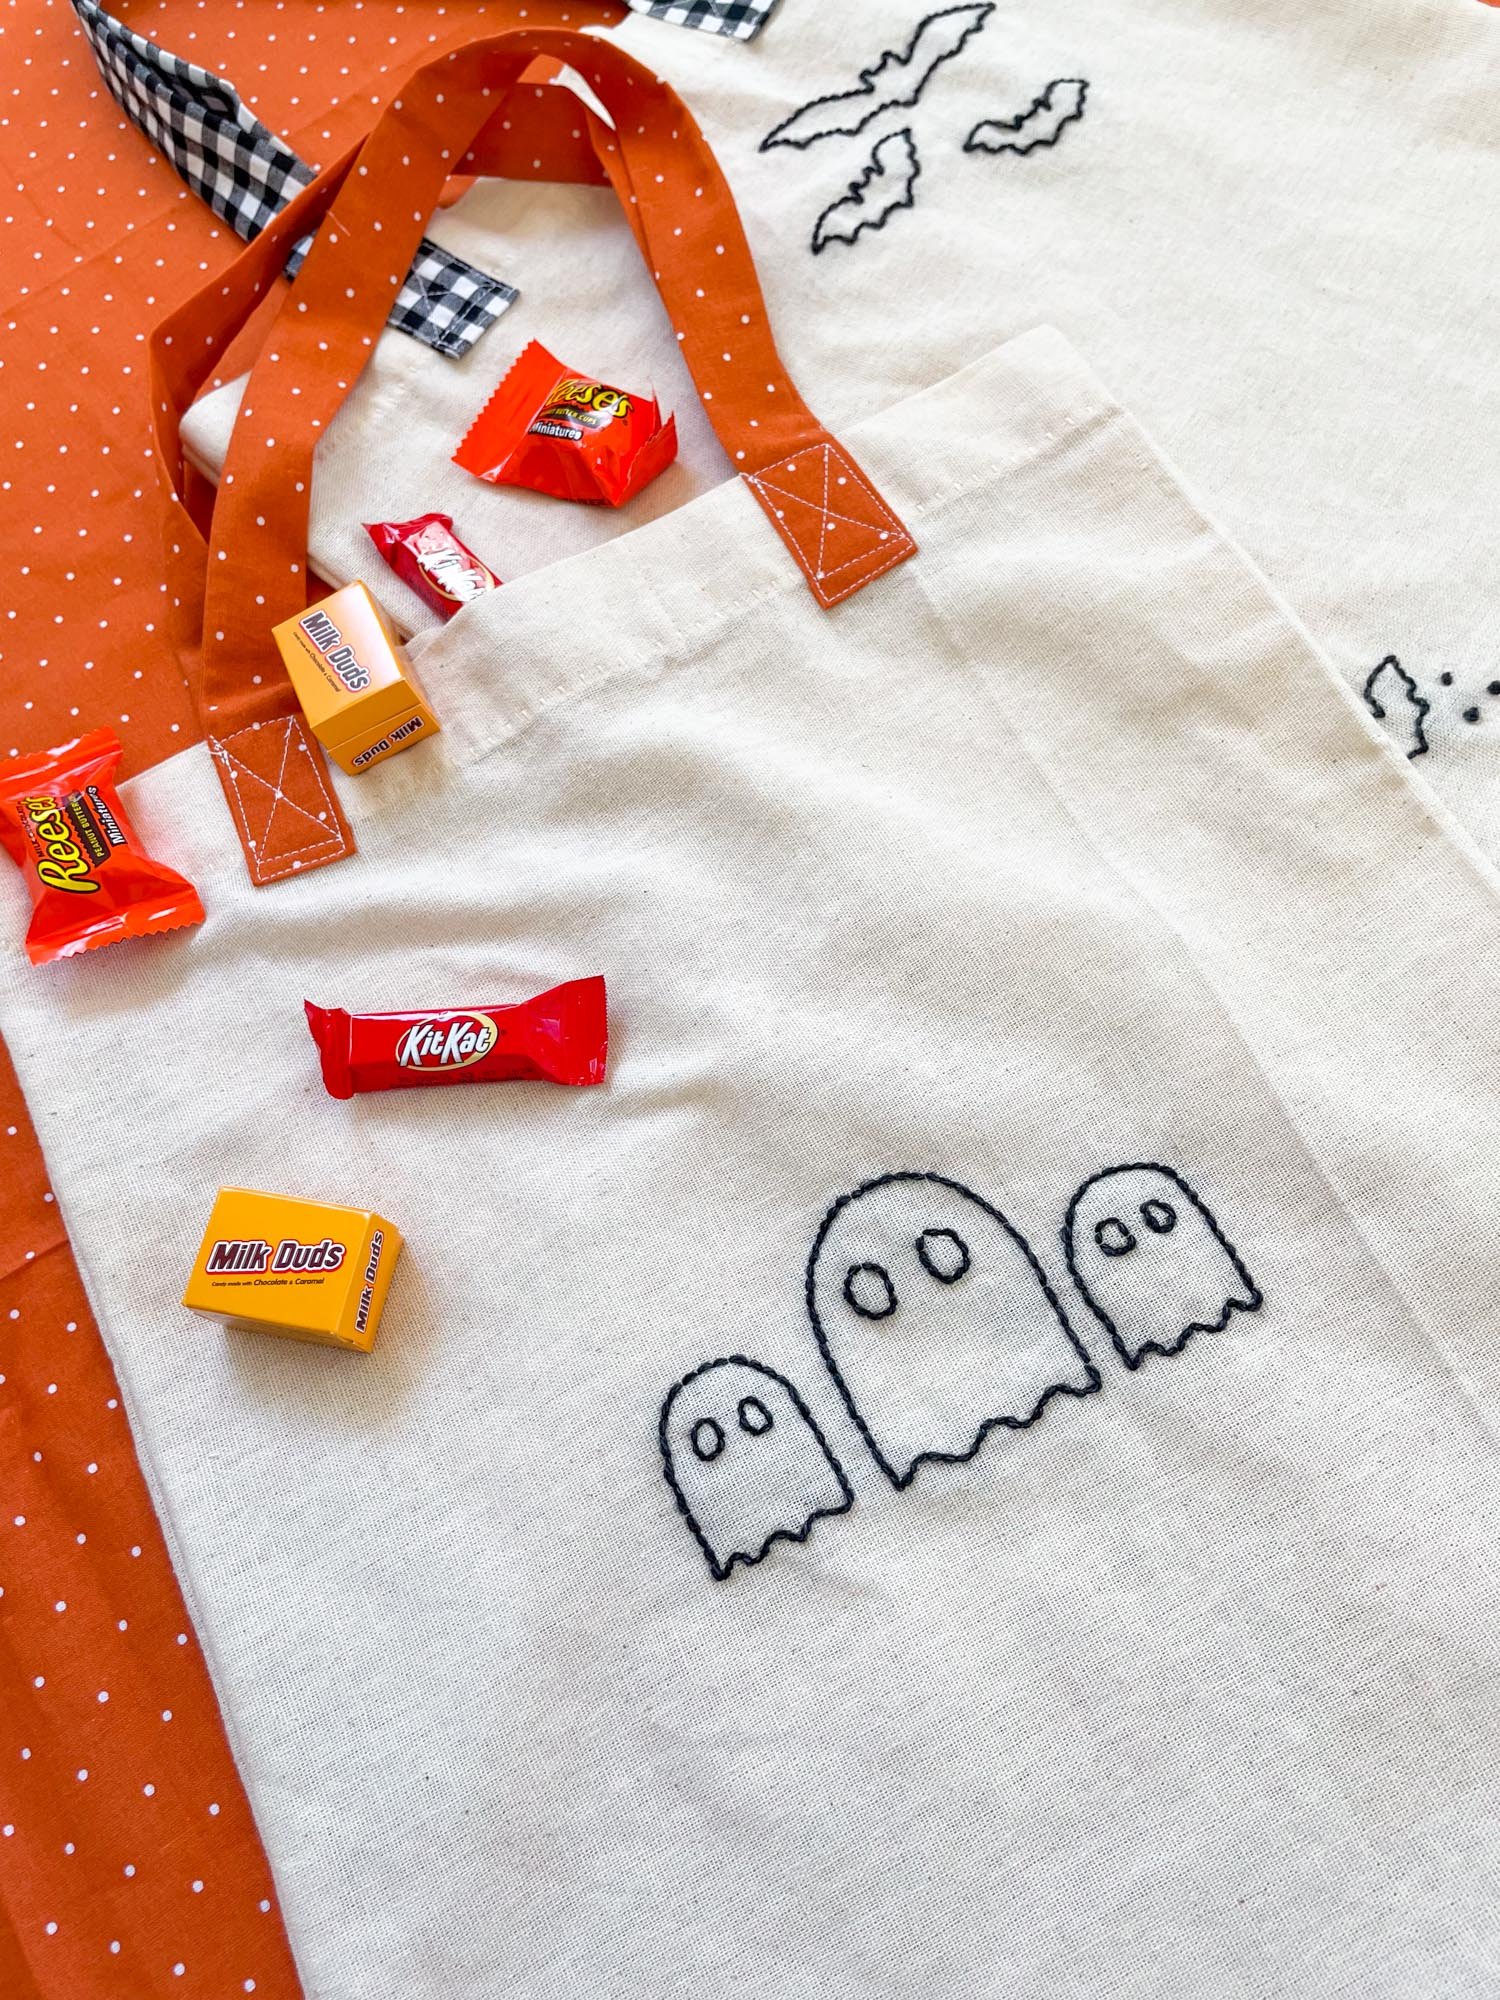 Halloween Embroidery Kits for Beginners DIY Embroidery Patterns